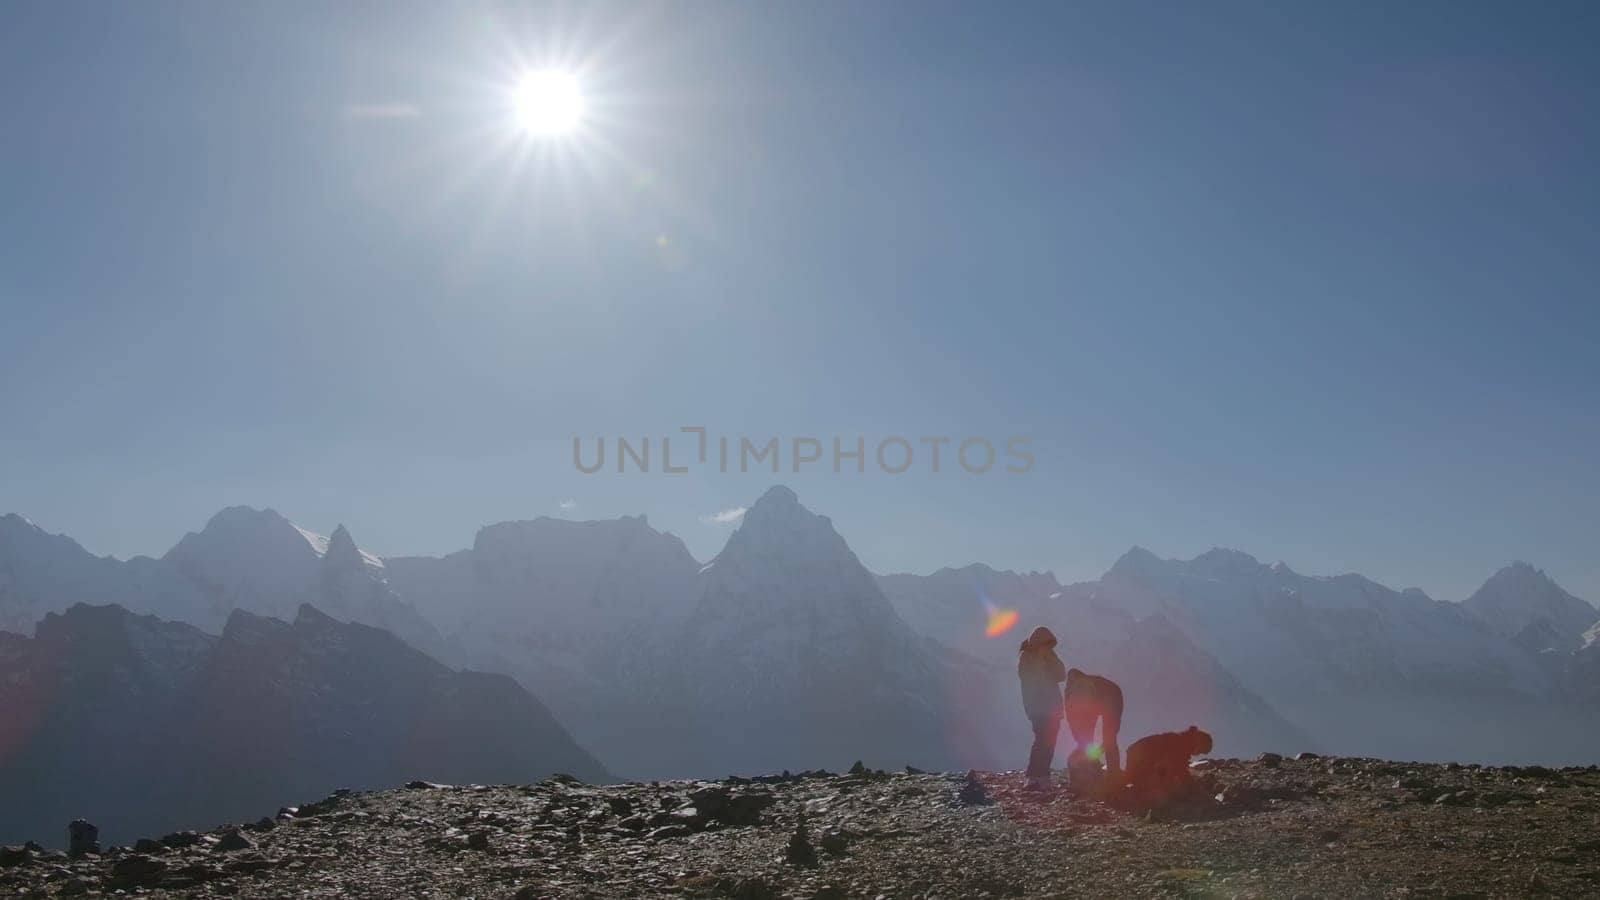 Tourists on background of mountain landscape with bright sun. Creative. Beautiful motivating view of peaks of snowy mountains in rays of sun. Hikers on background of mountain peaks on sunny day by Mediawhalestock